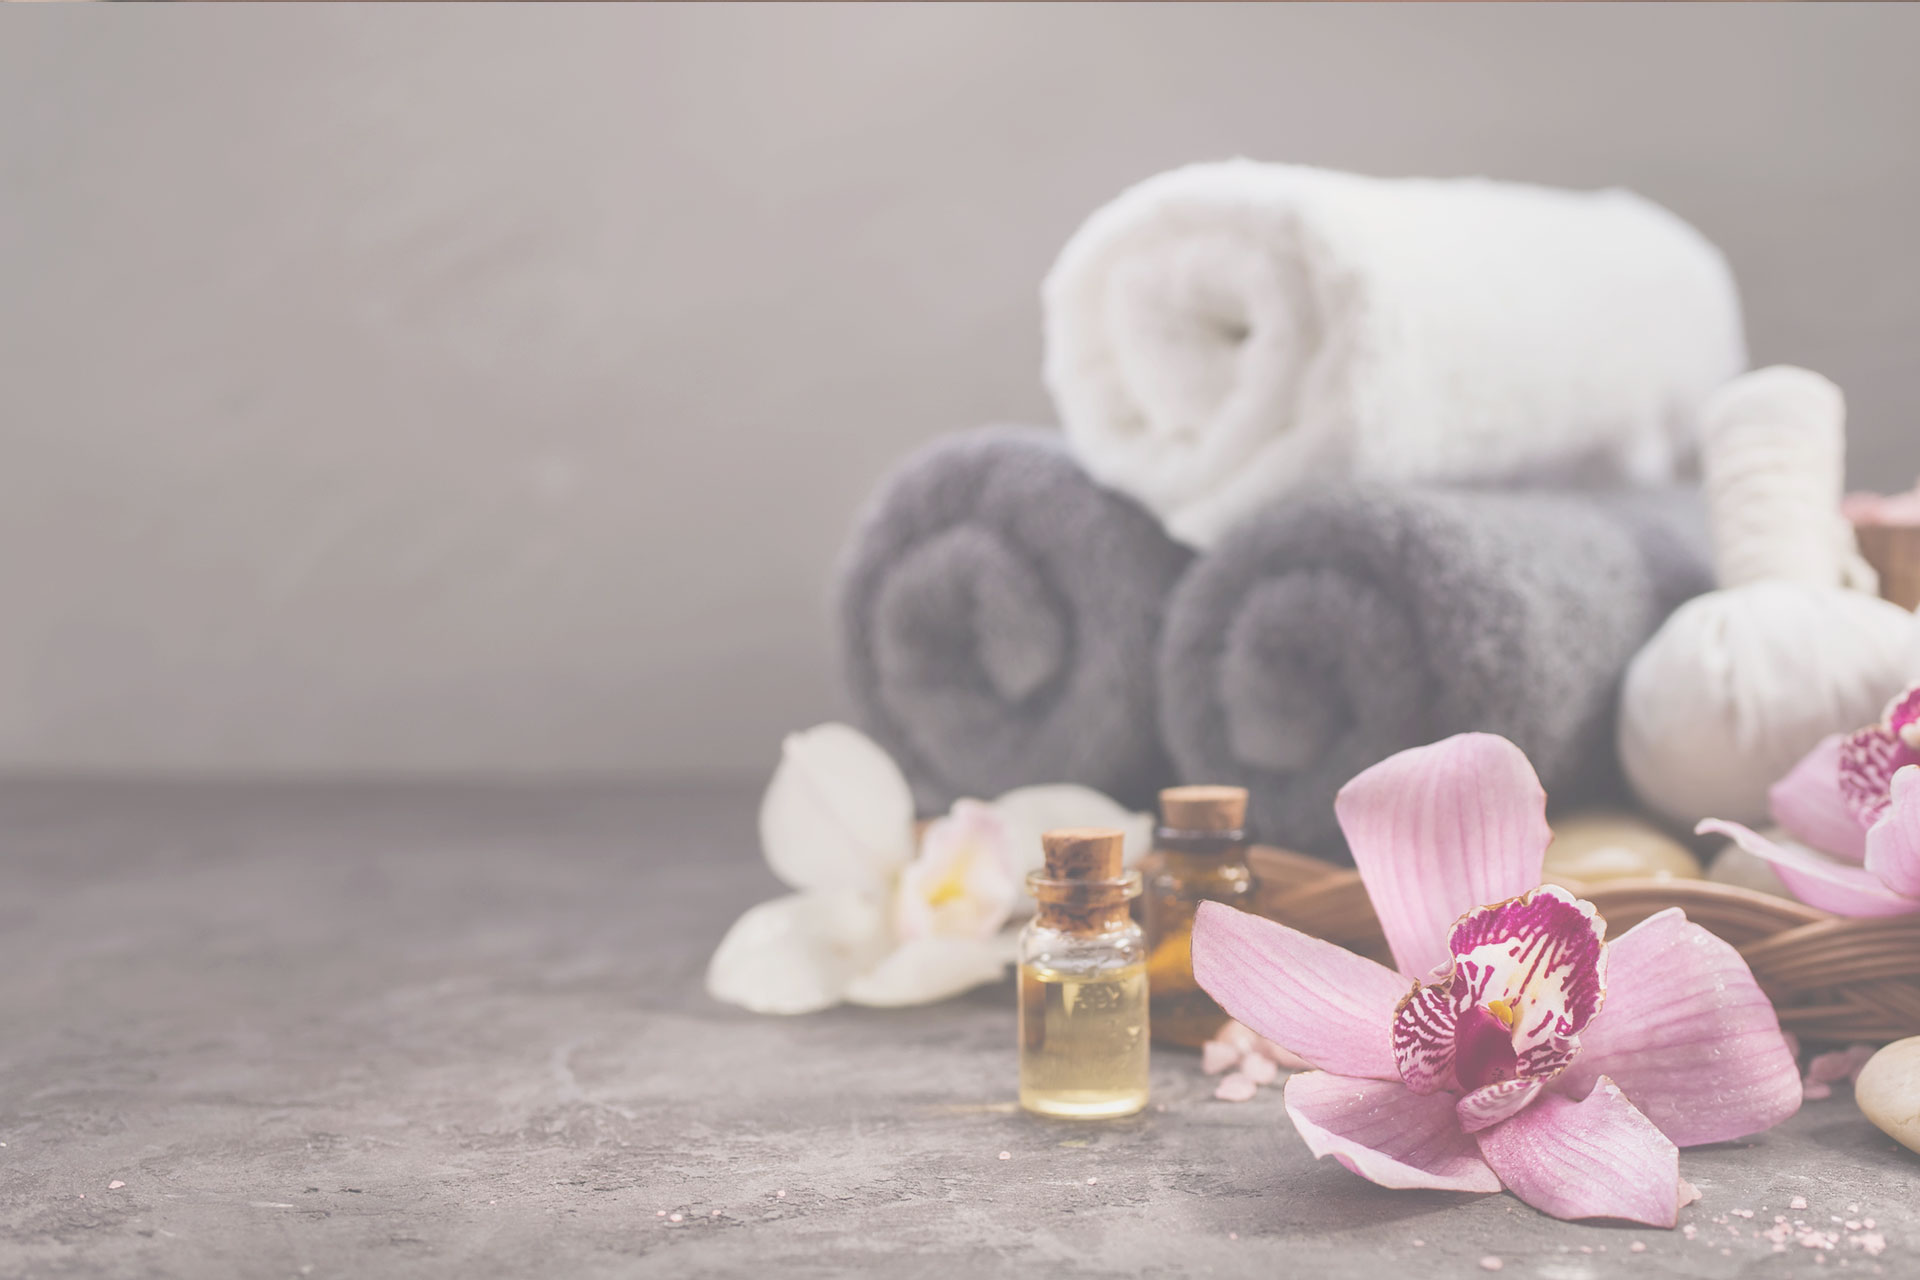 towels with flowers & essential oils